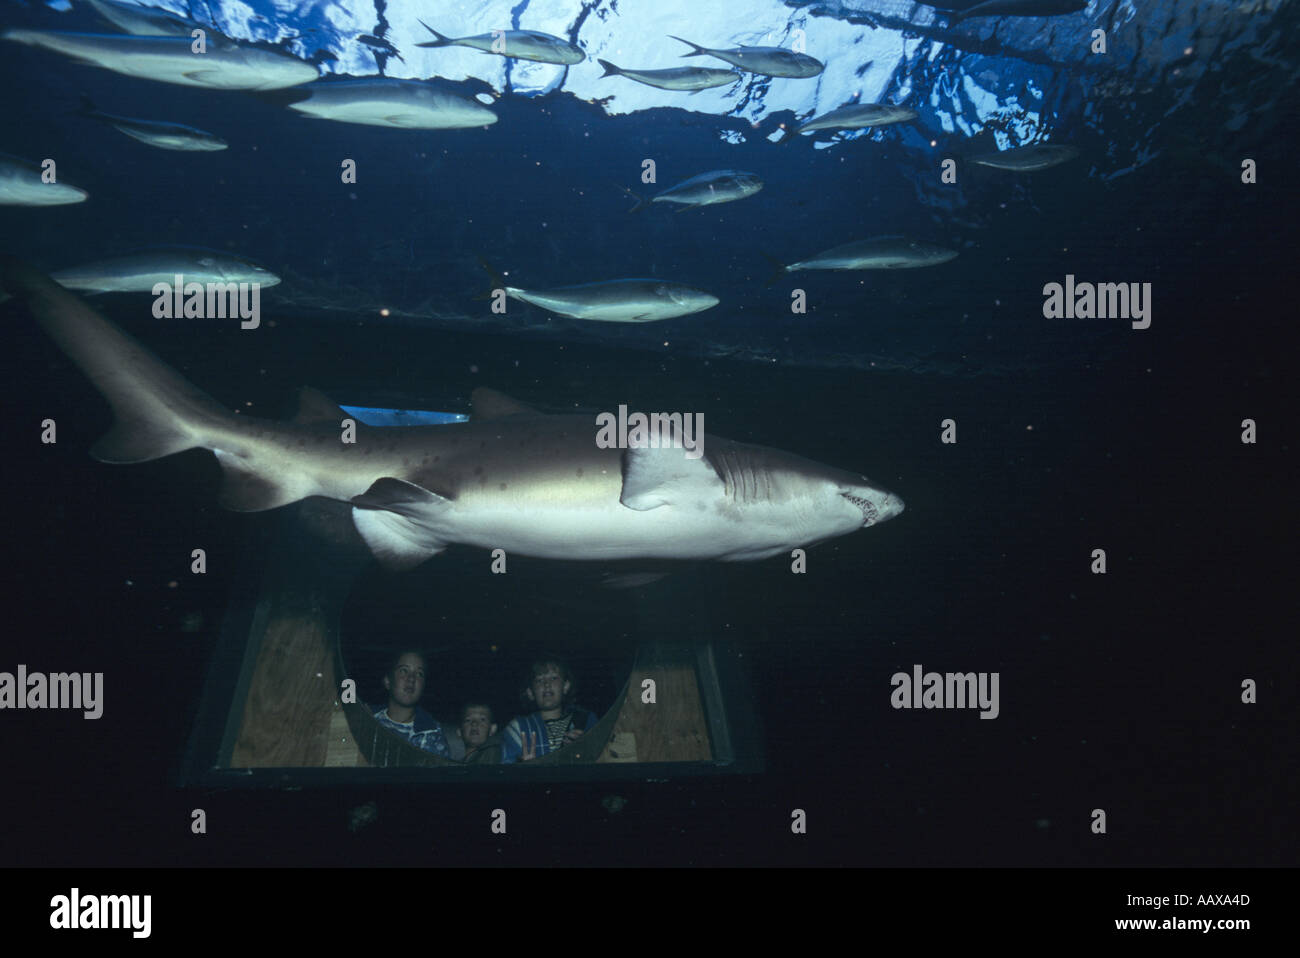 Sand Tiger or Raggie shark at Two Oceans Aquarium in South Africa  Stock Photo